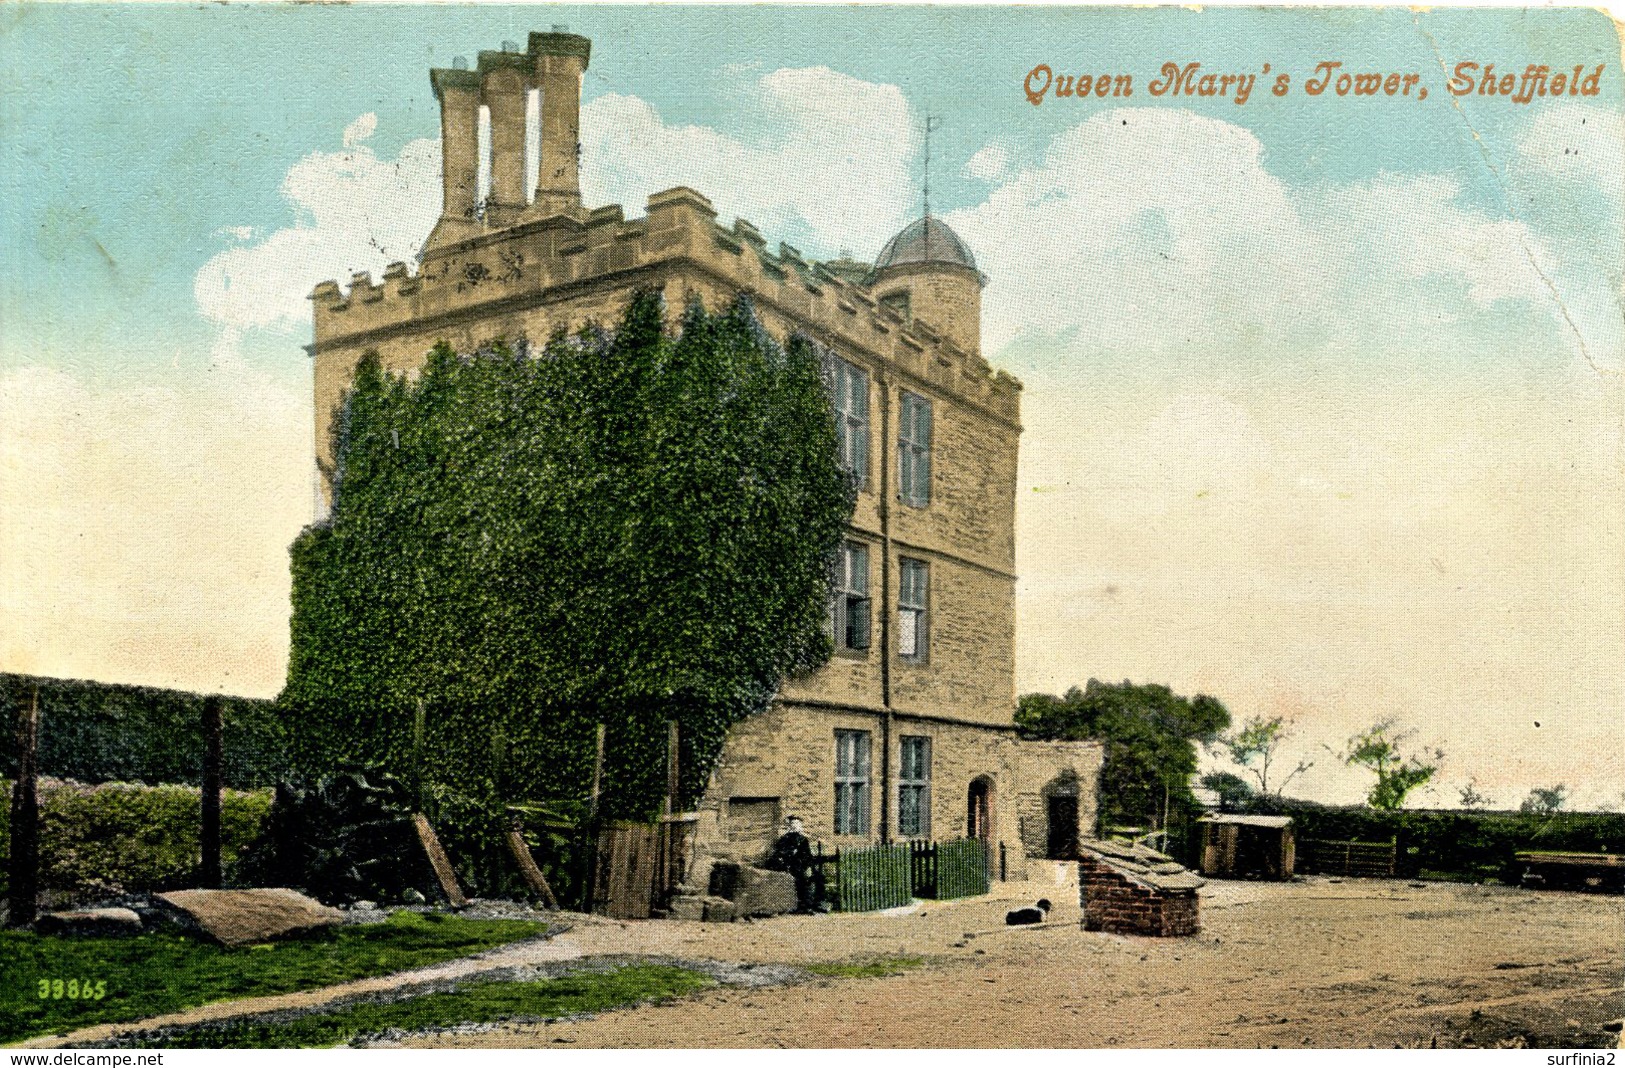 SOUTH YORKS - SHEFFIELD - QUEEN MARY'S TOWER 1908 Ys246 - Sheffield